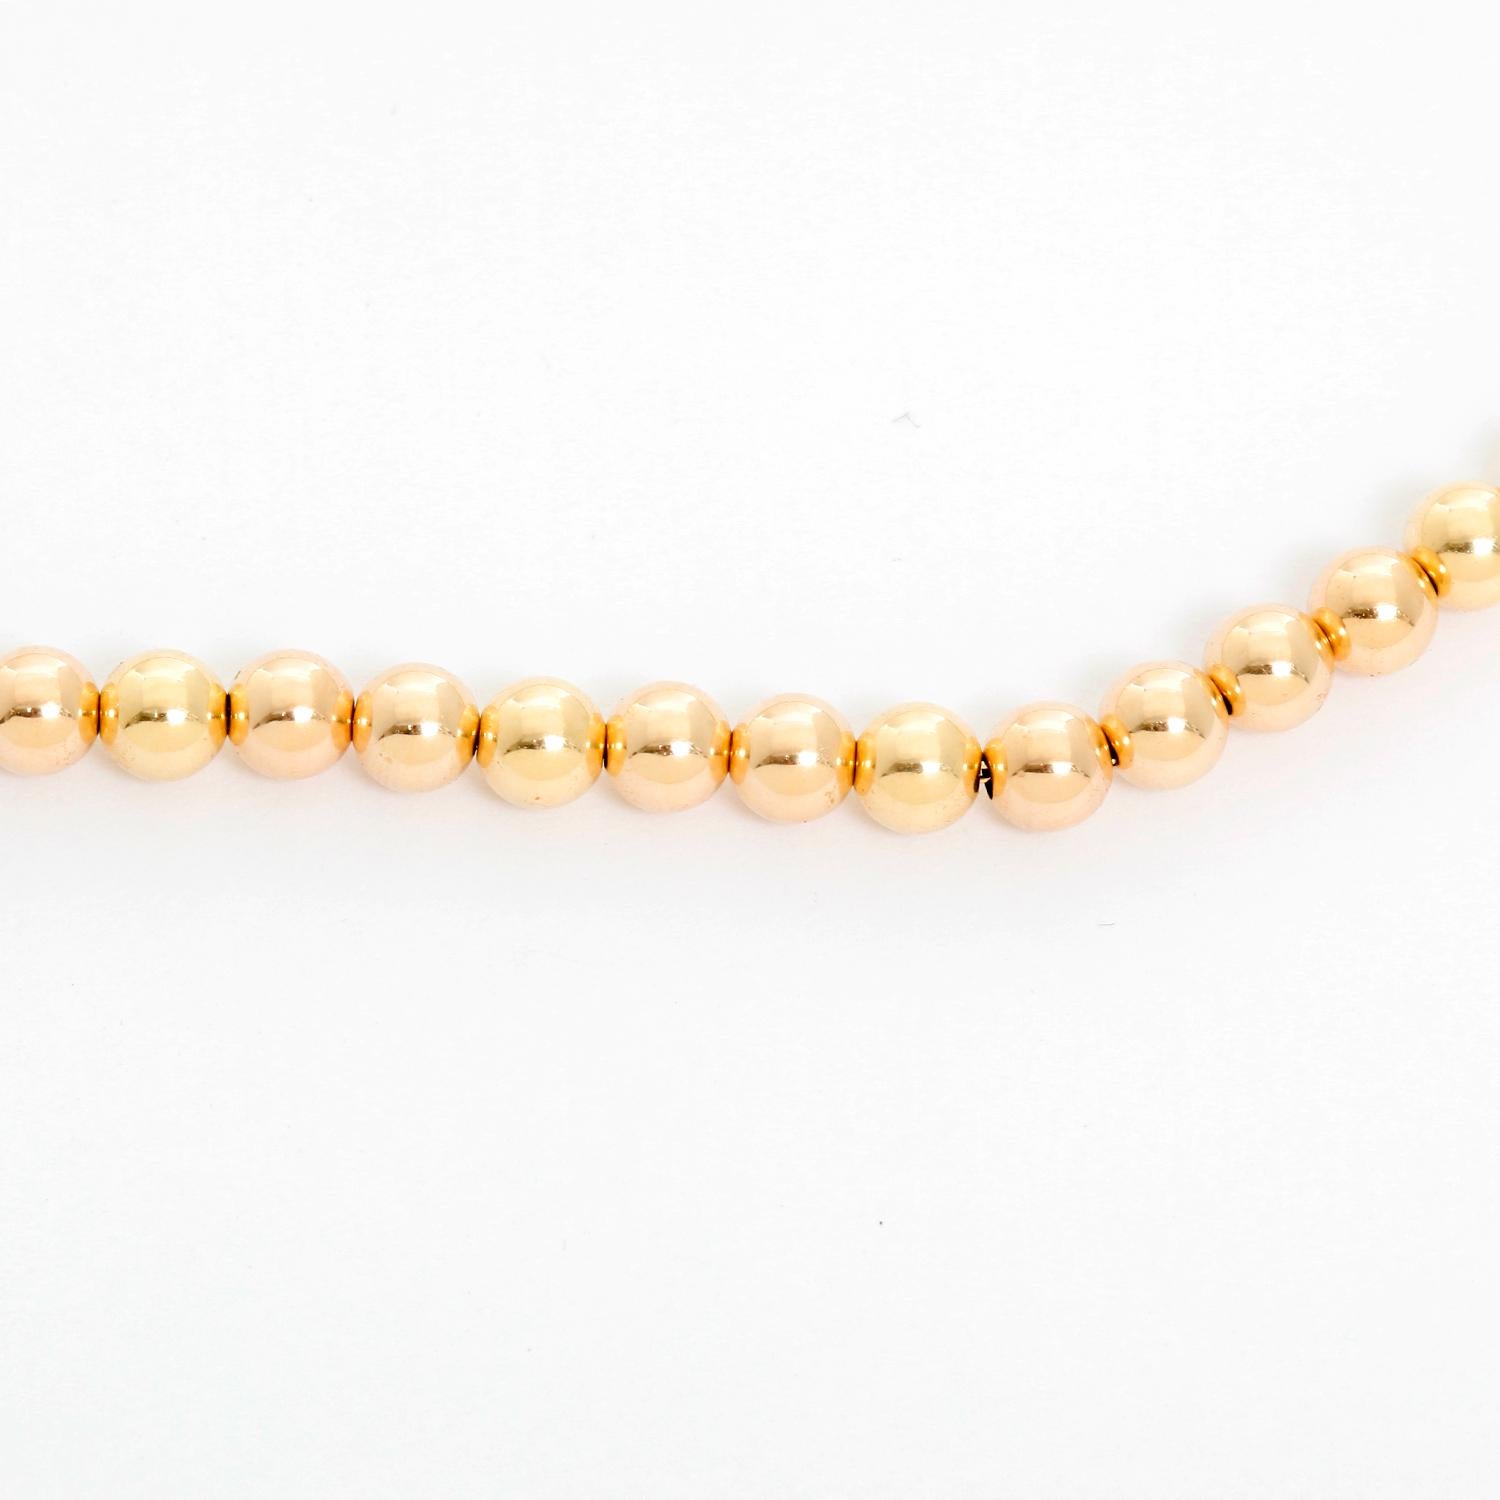 14K Yellow Gold Hollow Bead Necklace - Beautiful 14K Yellow gold bead necklace.  5 MM  beads . Total length 18 inches. Total weight 5.1 grams.  Perfect for layering!